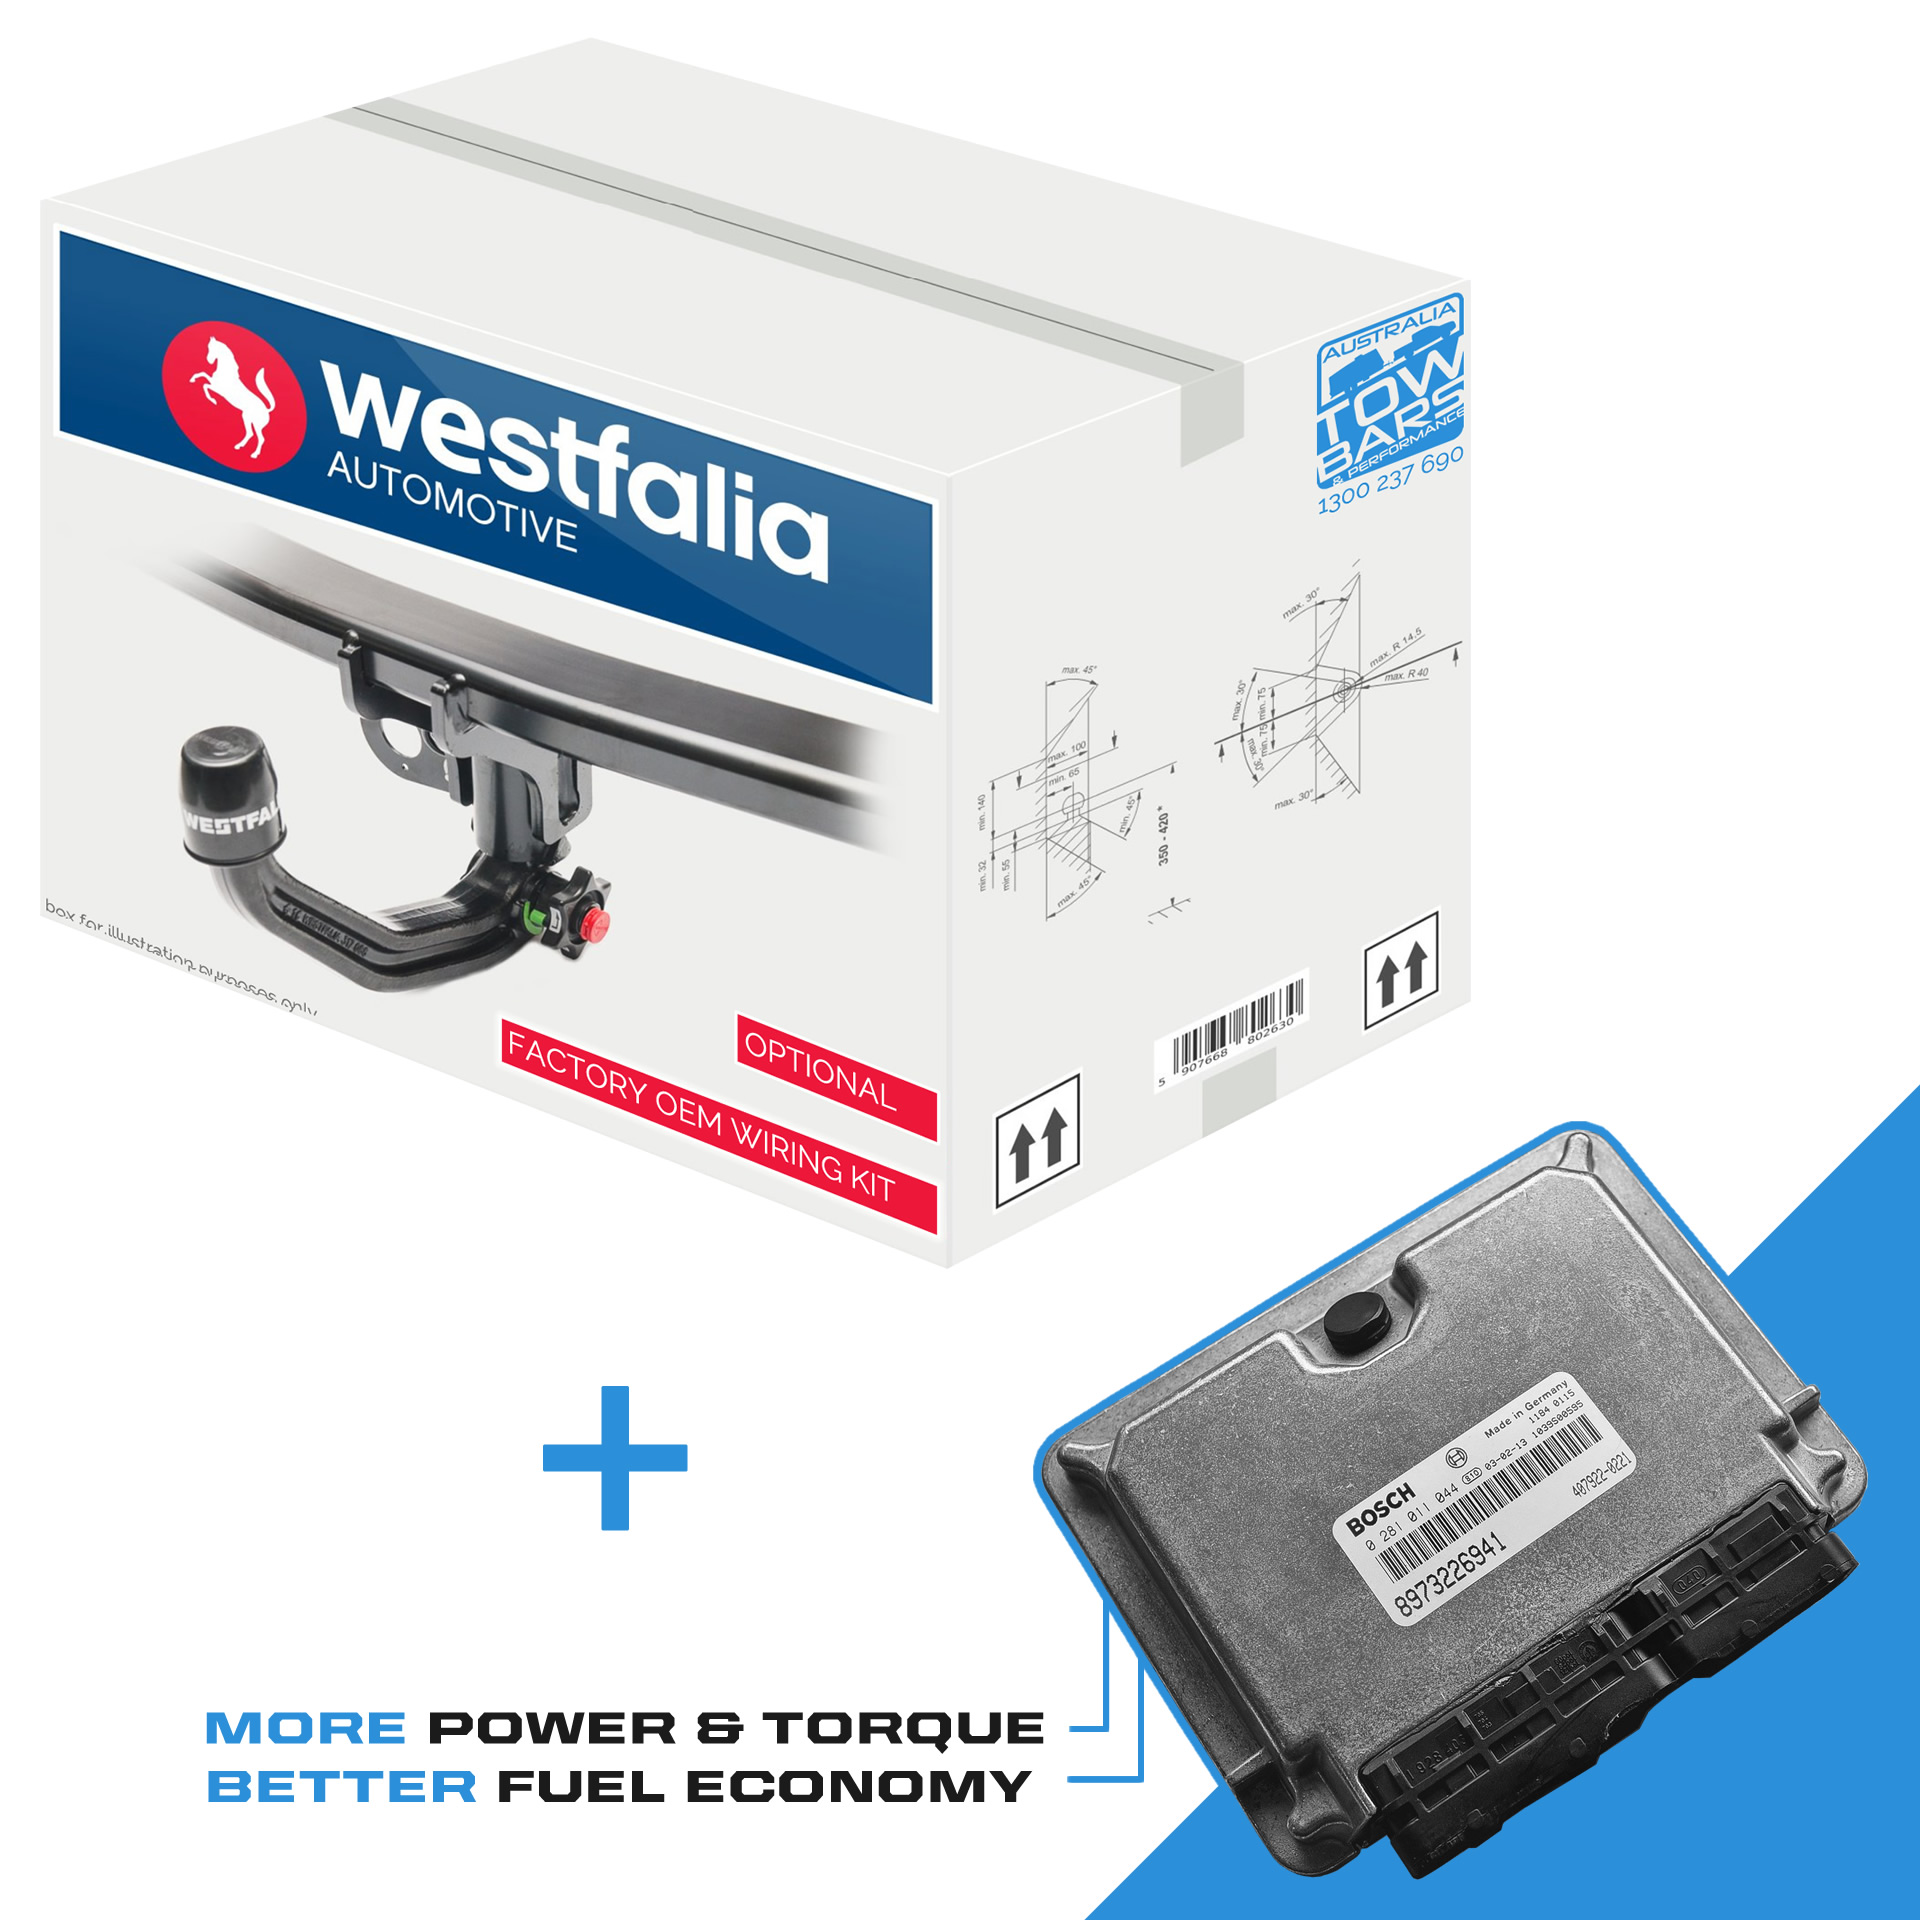 Using Westfalia Quick Release Towbars and Vehicle ECU Tunes Together